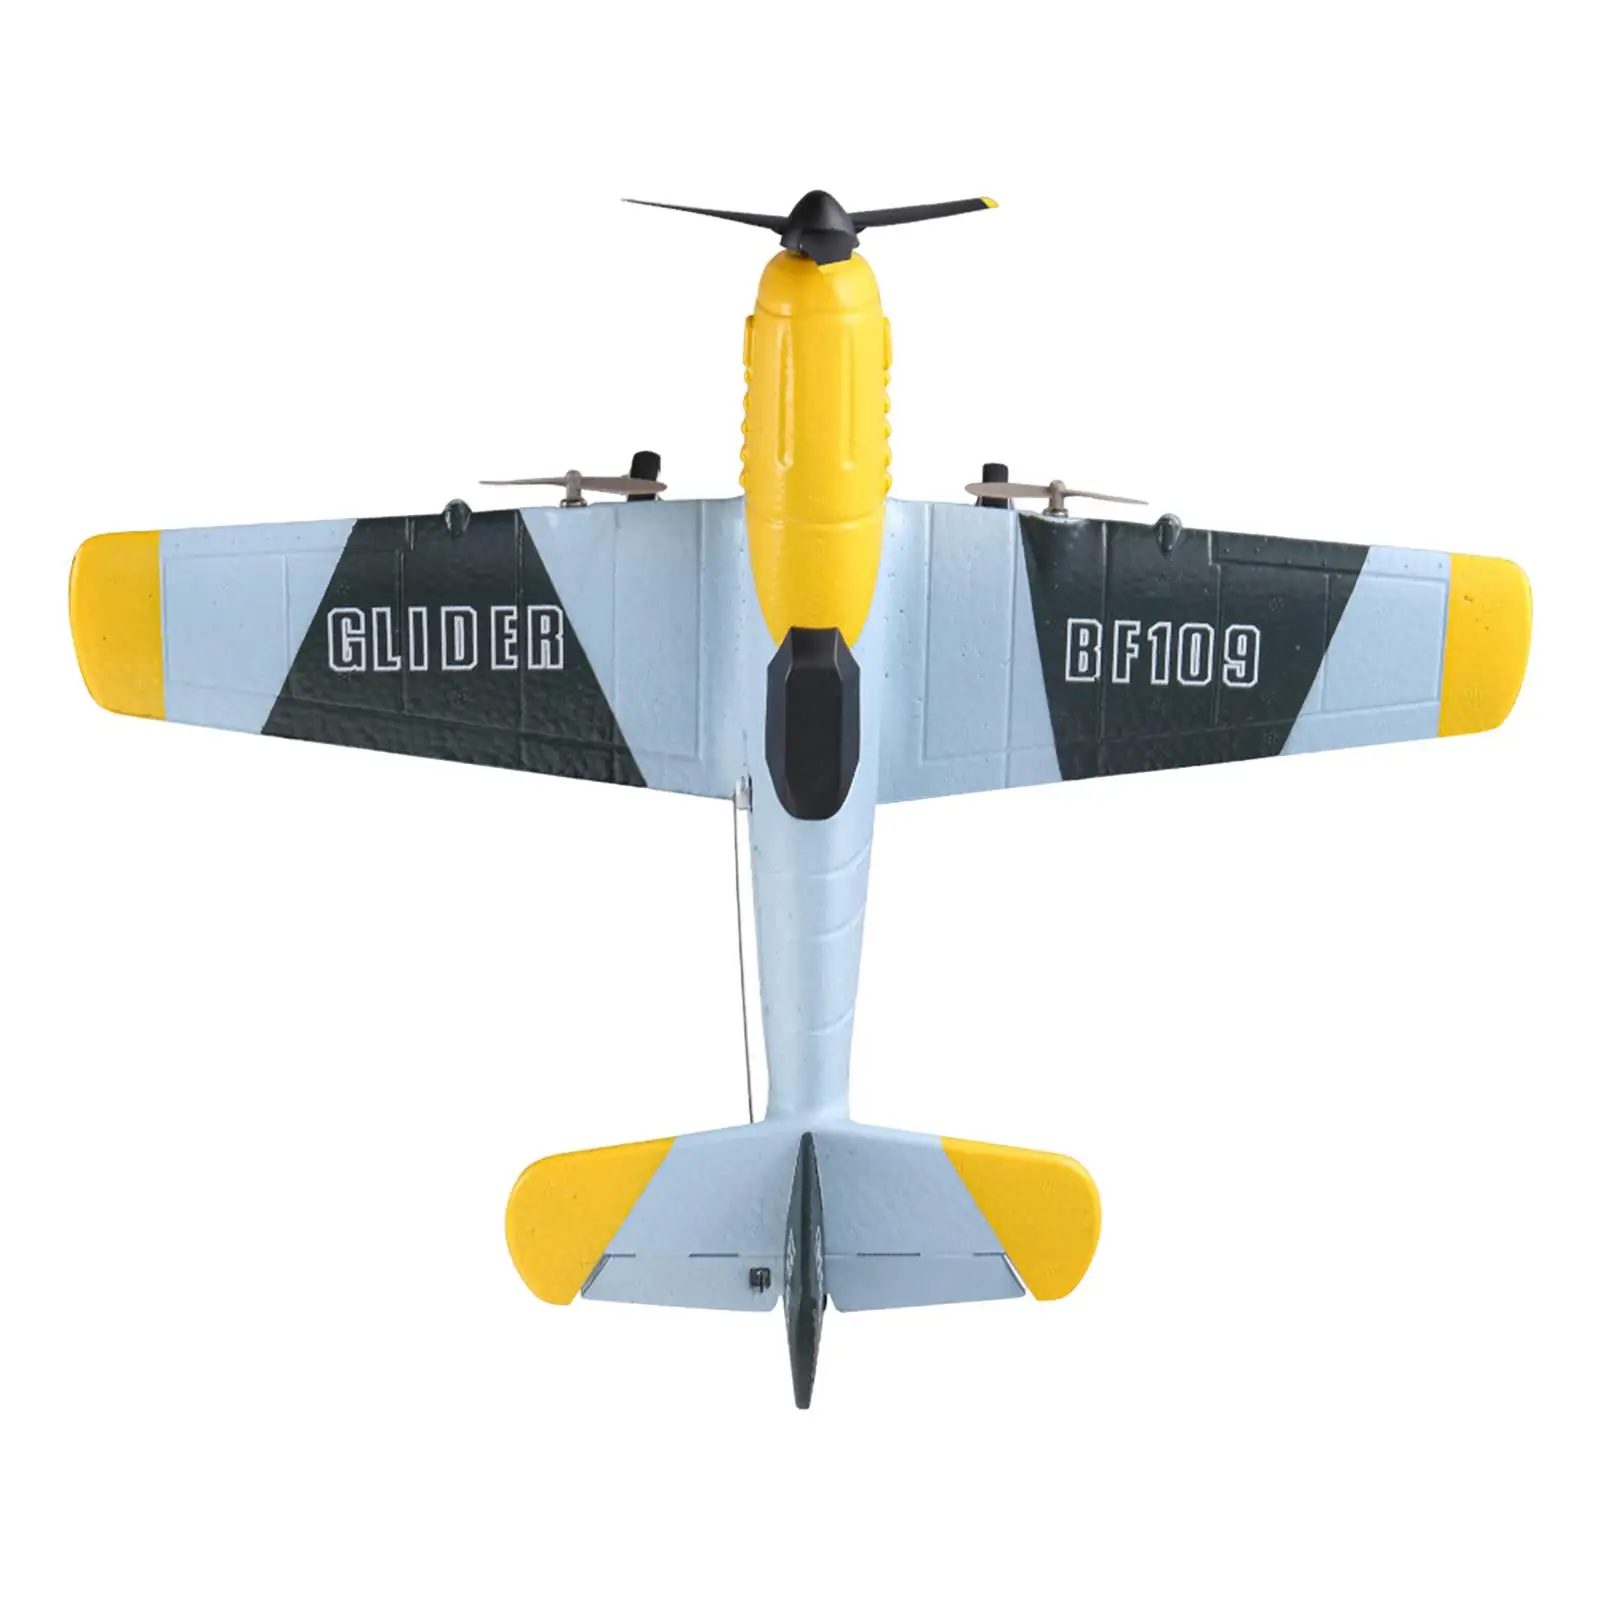 3 CH RC Easy to Contro 2.4G Remote Control Airplane Hobby RC Glider for Kids Beginner Adults Boys Girls